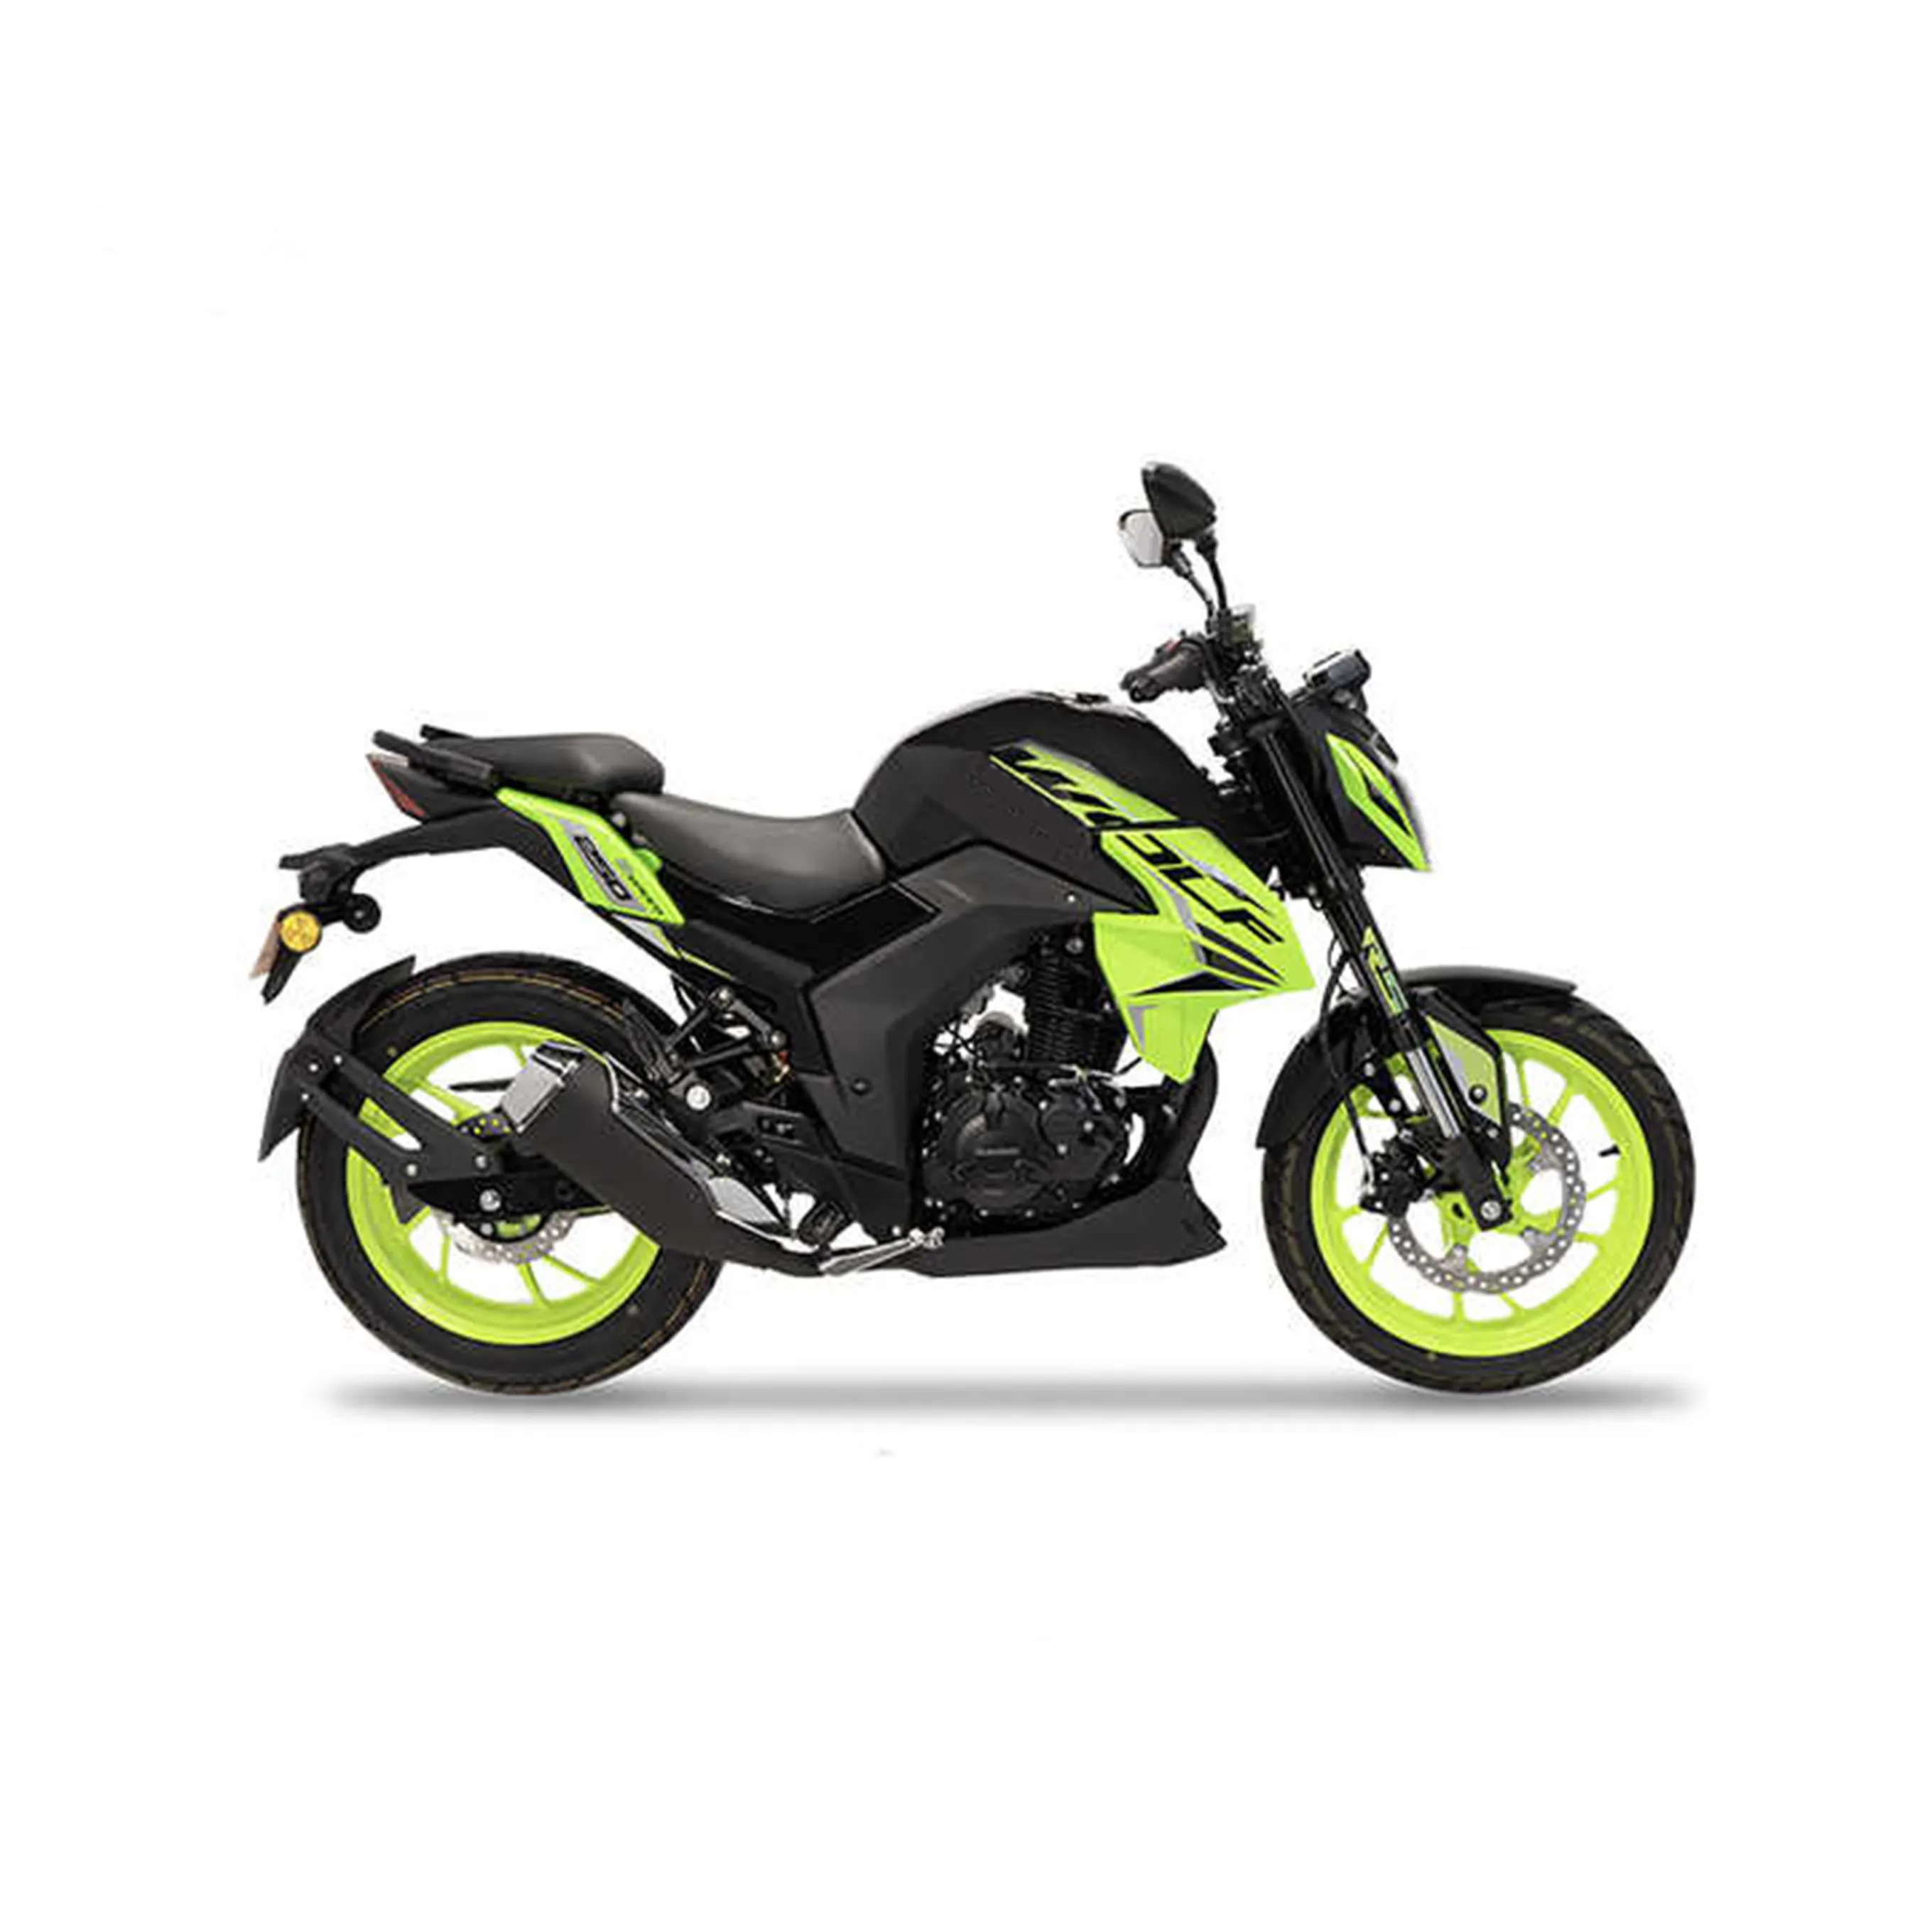 new motorcycle 150cc off-road motorcycles 4 stroke 125cc dirt bike